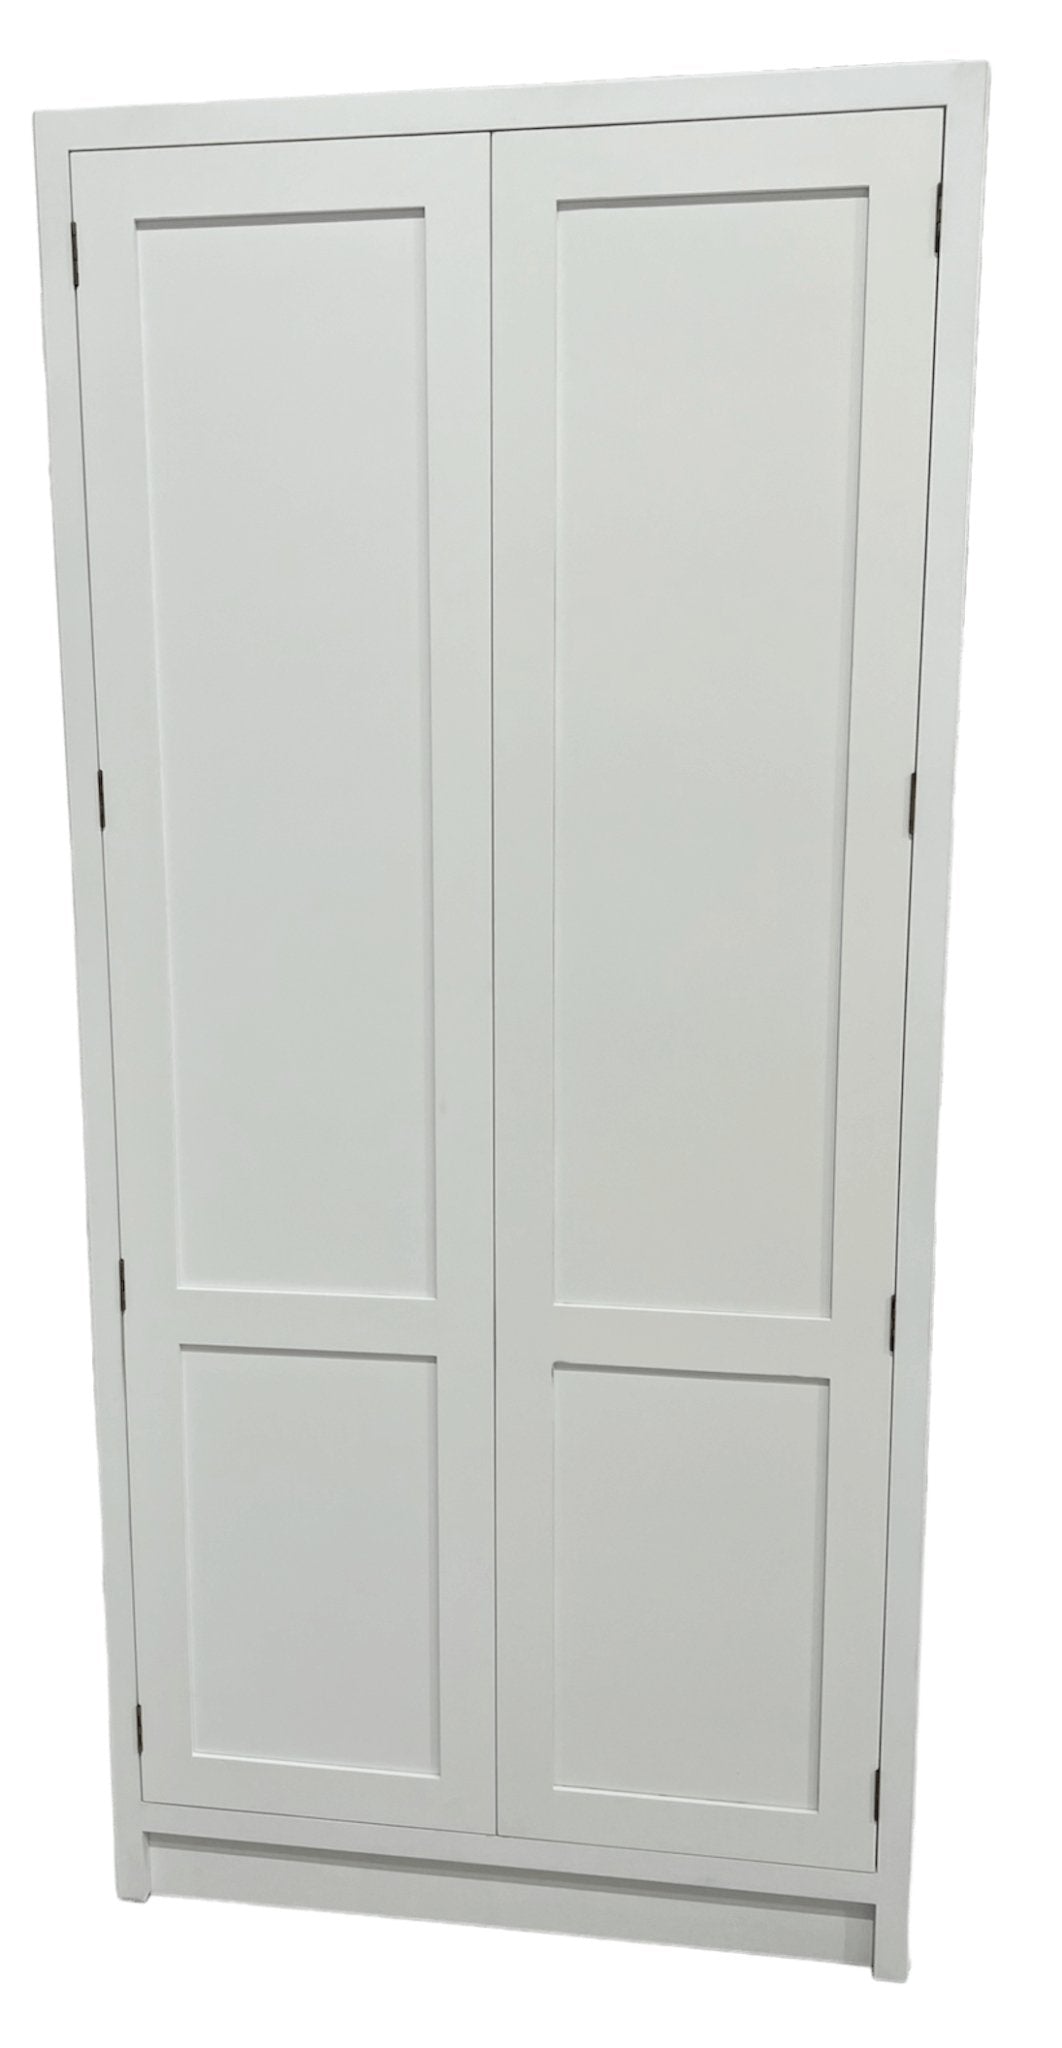 TL 800 - 800mm Wide Tall double door Larder - Classic Kitchens Direct